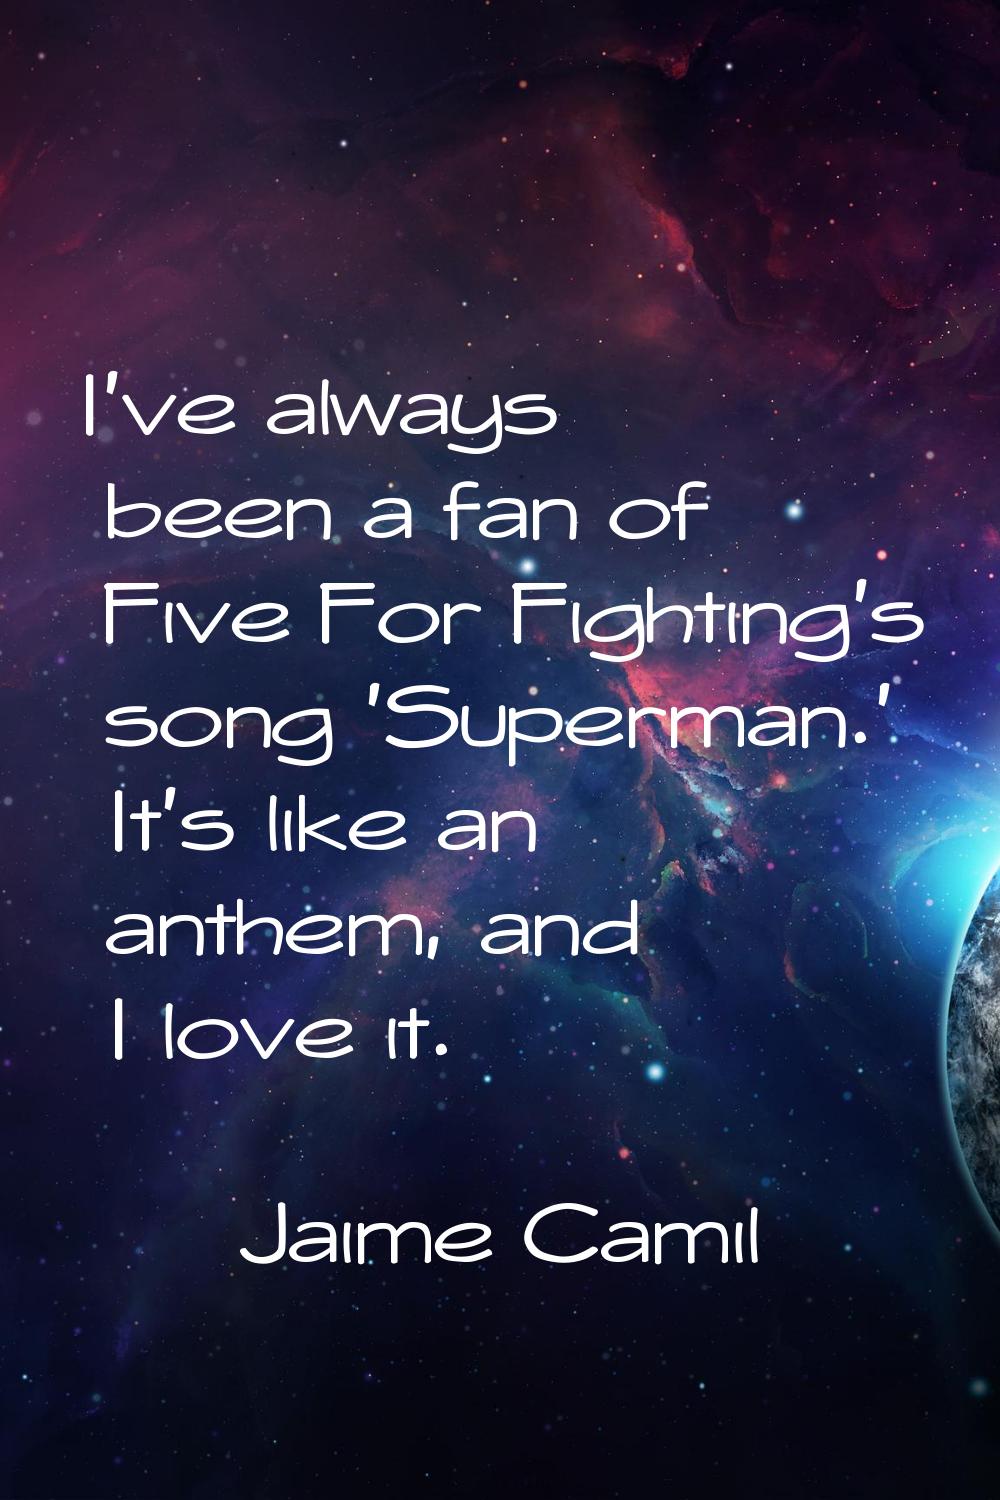 I've always been a fan of Five For Fighting's song 'Superman.' It's like an anthem, and I love it.